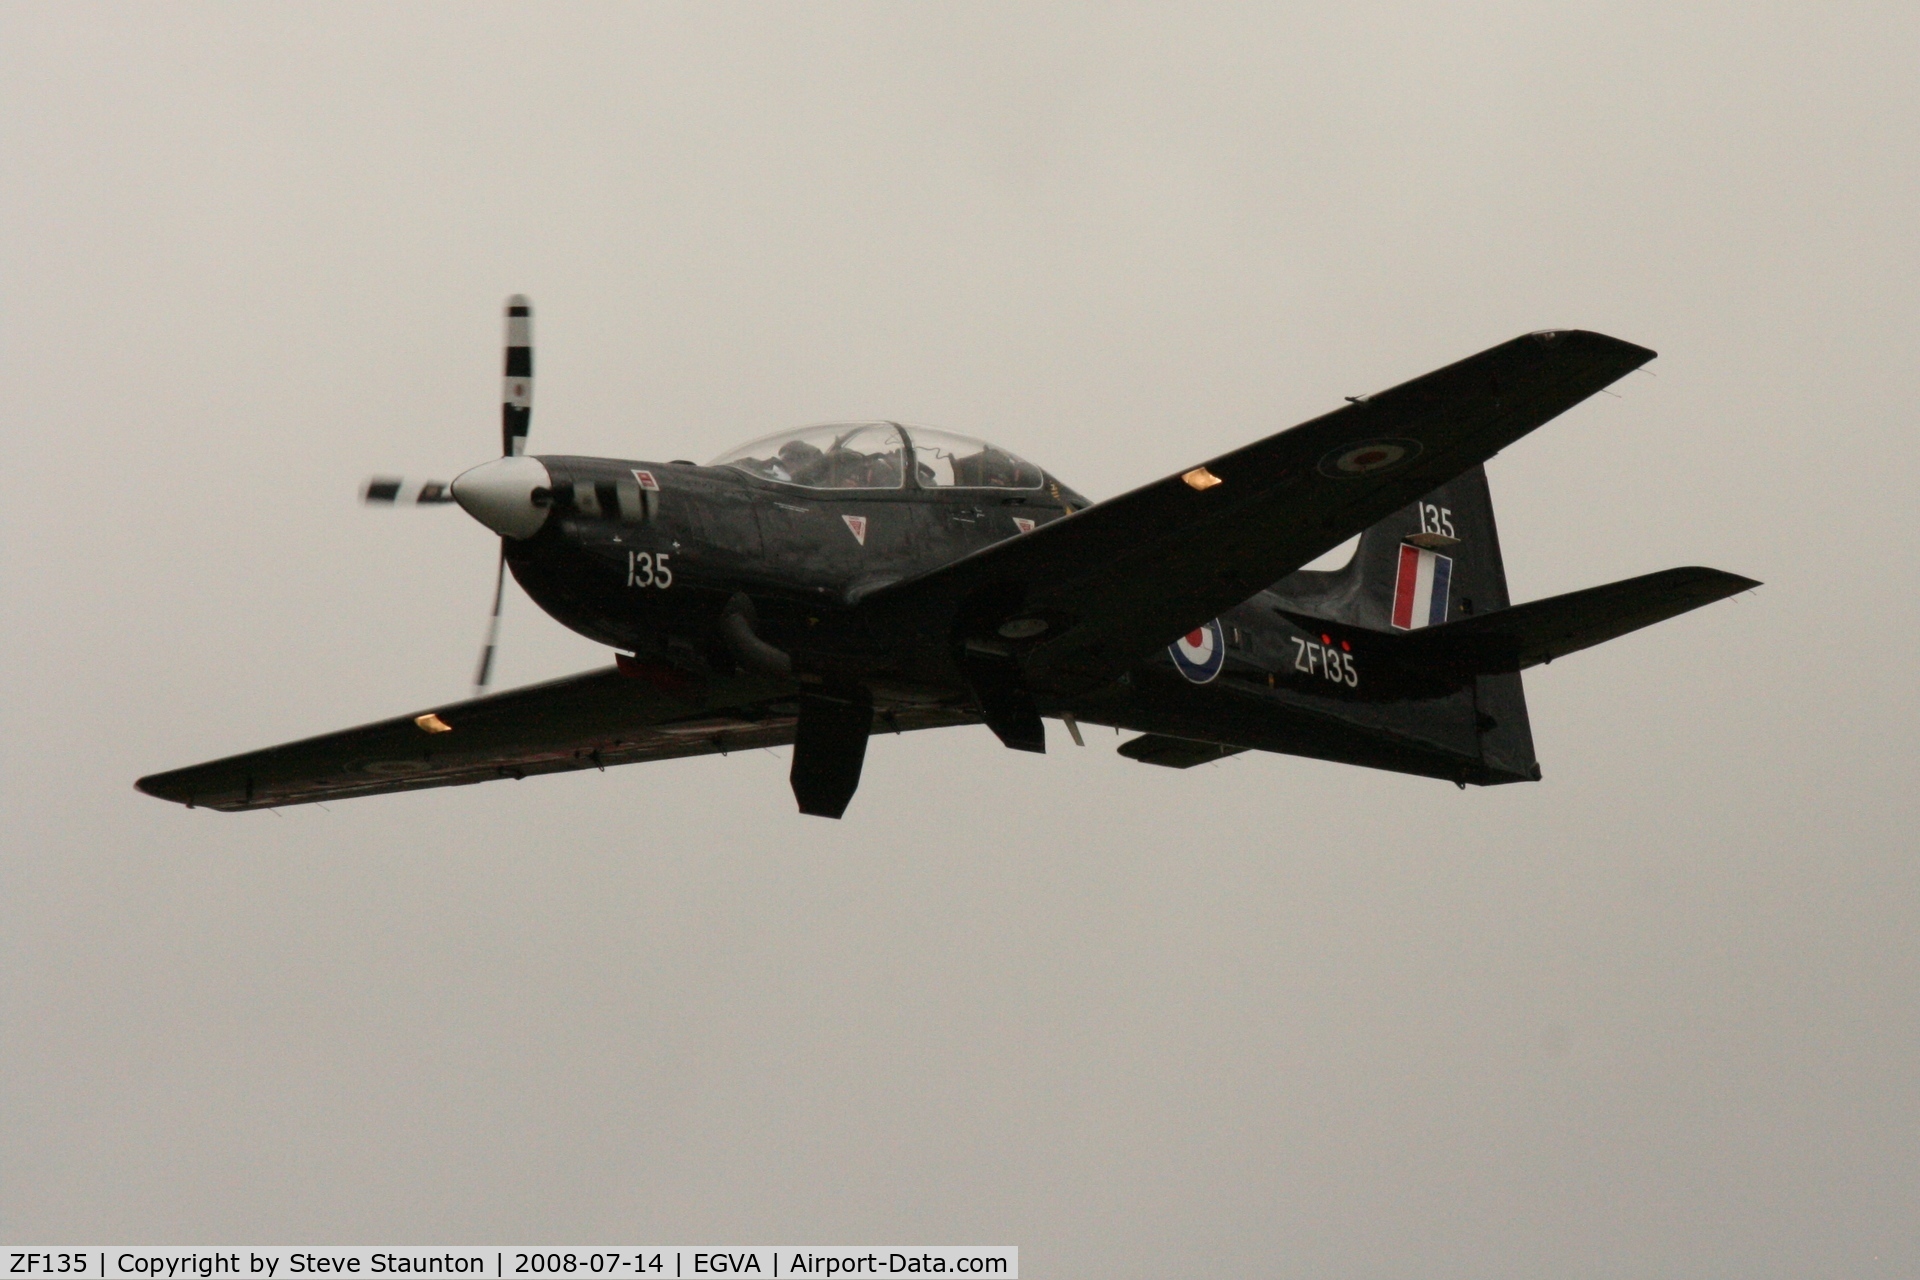 ZF135, 1986 Short S-312 Tucano T1 C/N S001/T1, Taken at the Royal International Air Tattoo 2008 during arrivals and departures (show days cancelled due to bad weather)